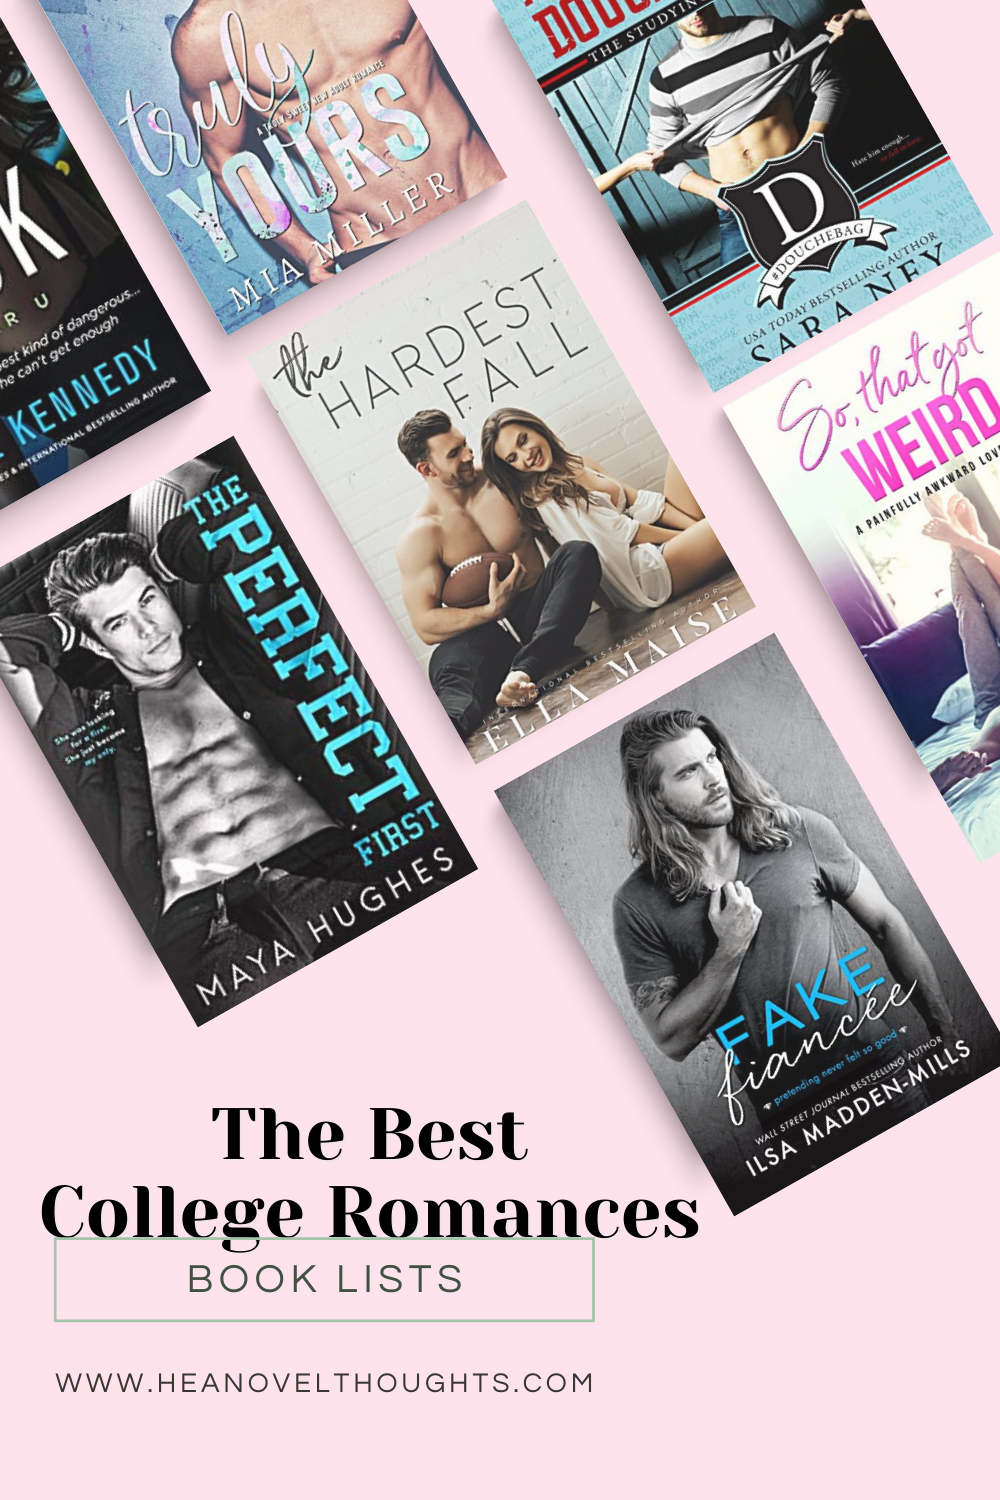 60 College Romance Books So Good They Score an A+ – She Reads Romance Books